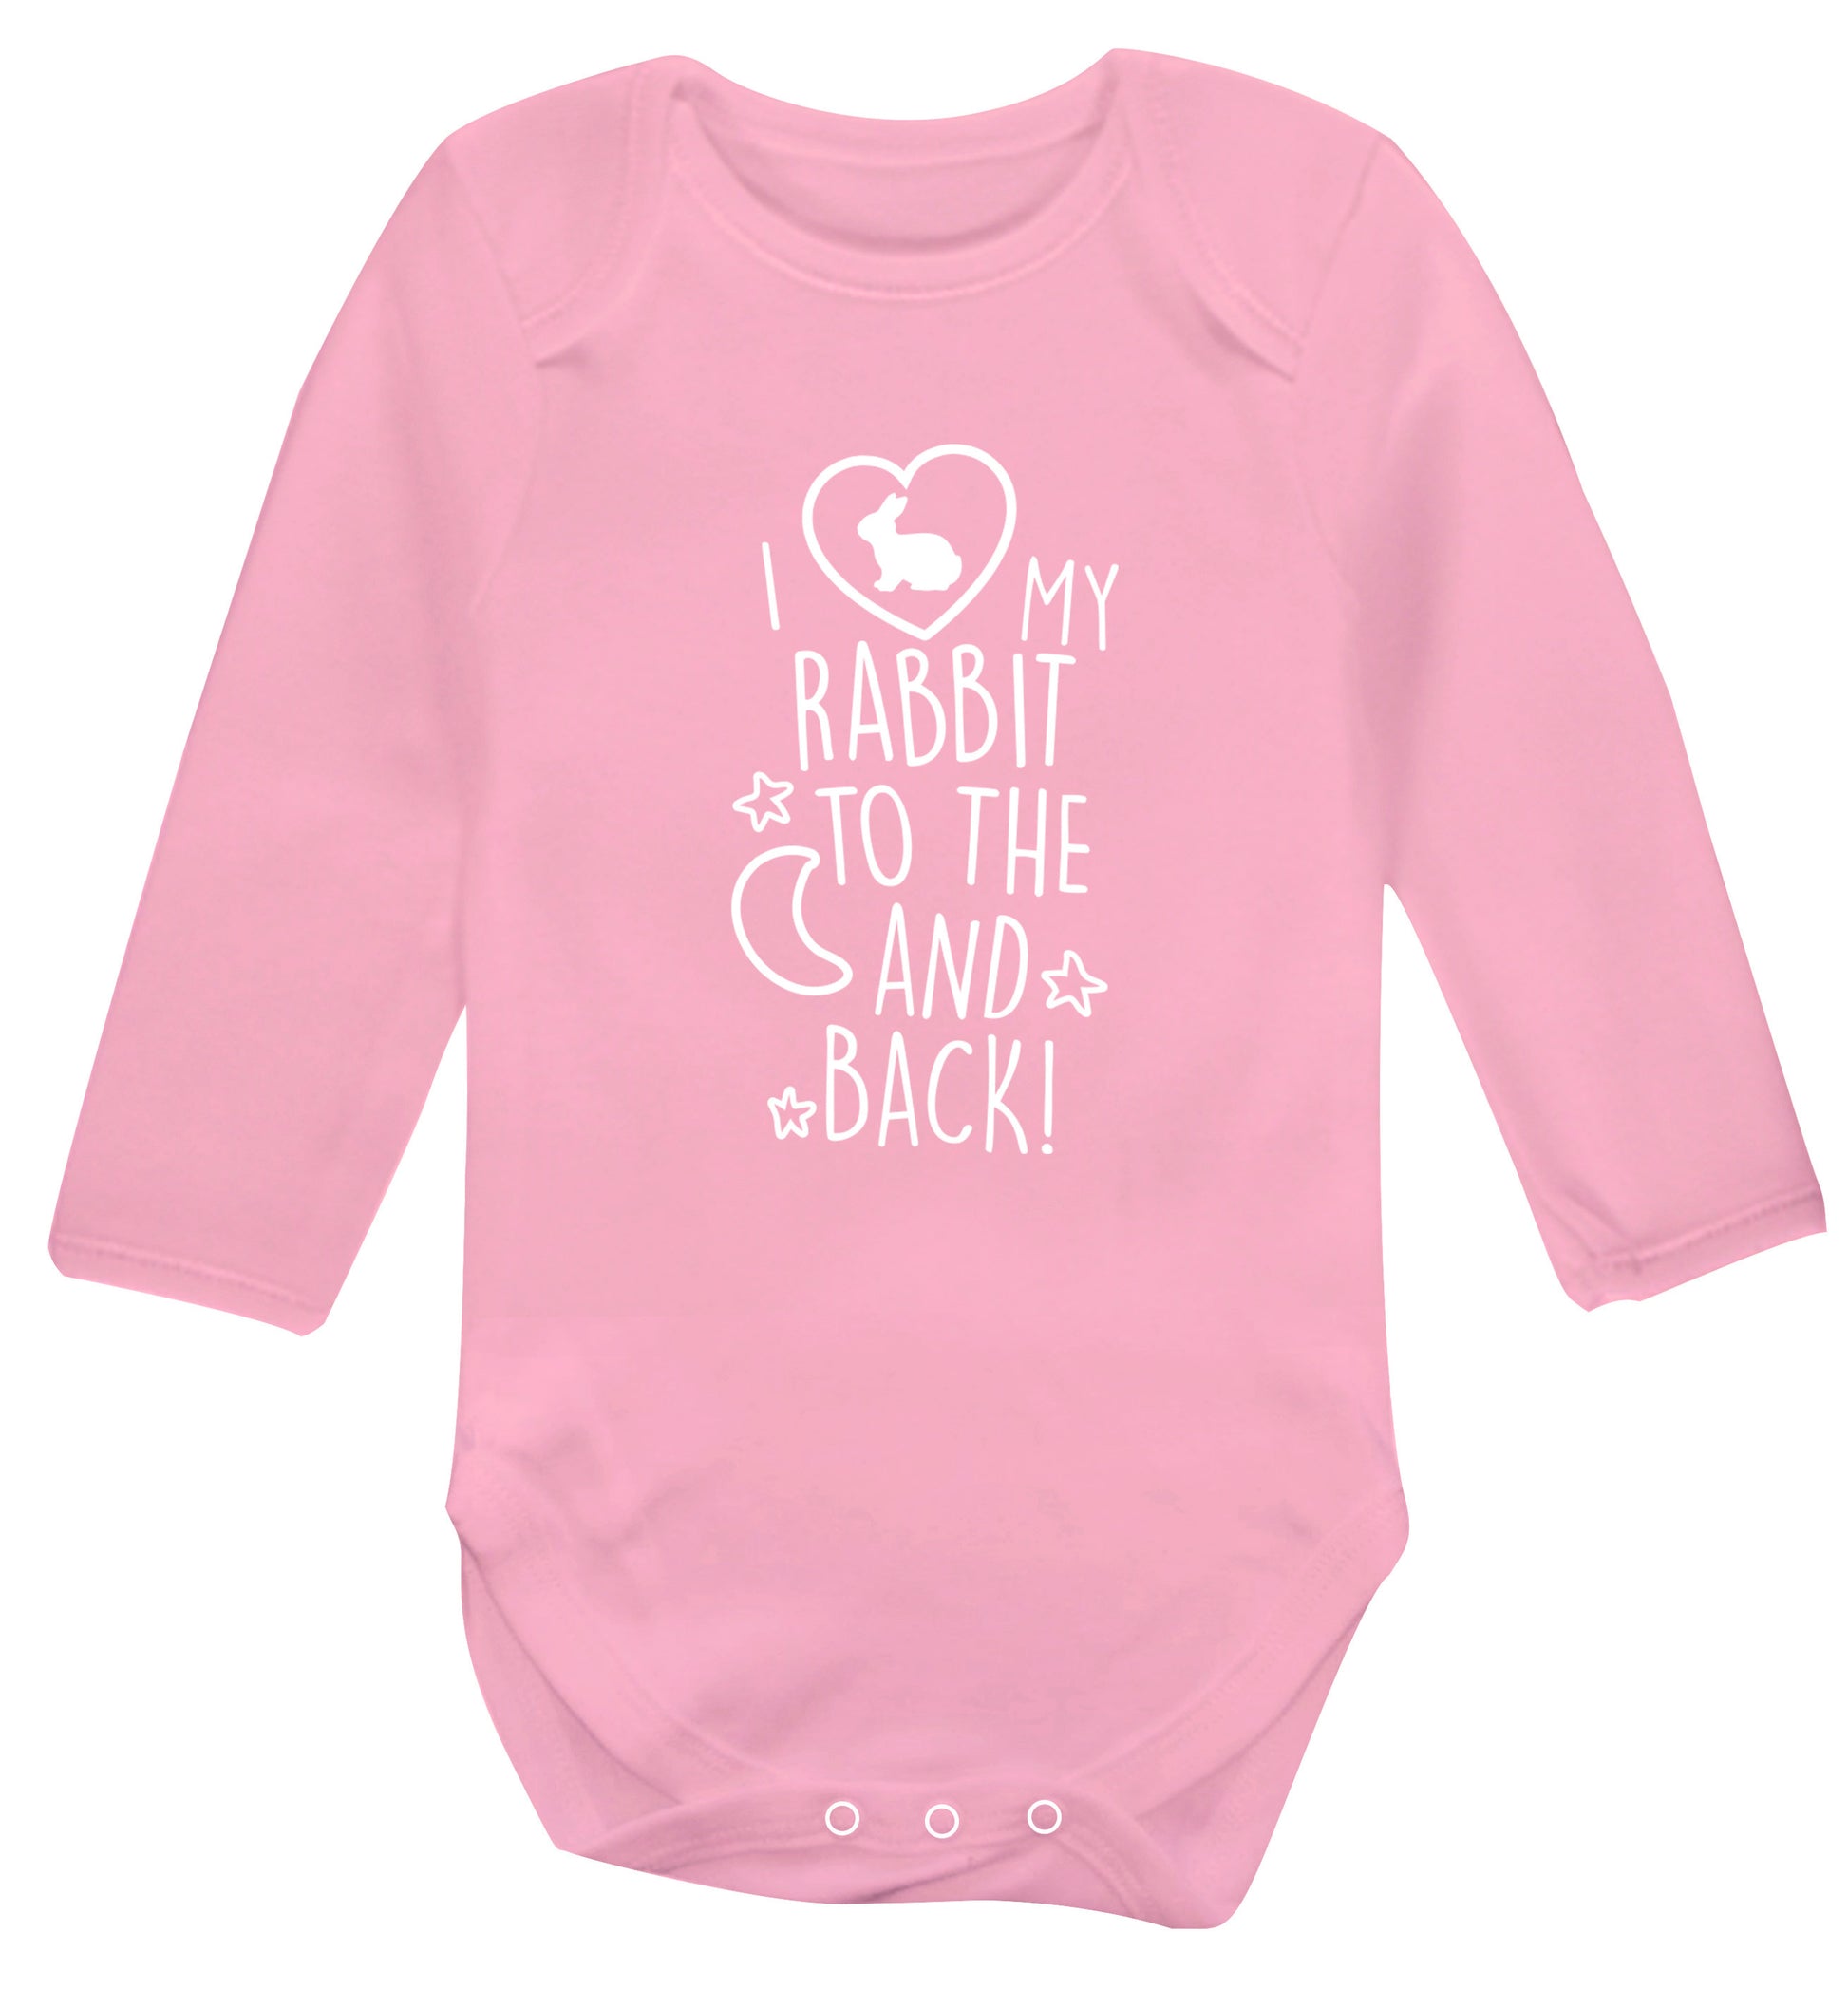 I love my rabbit to the moon and back Baby Vest long sleeved pale pink 6-12 months